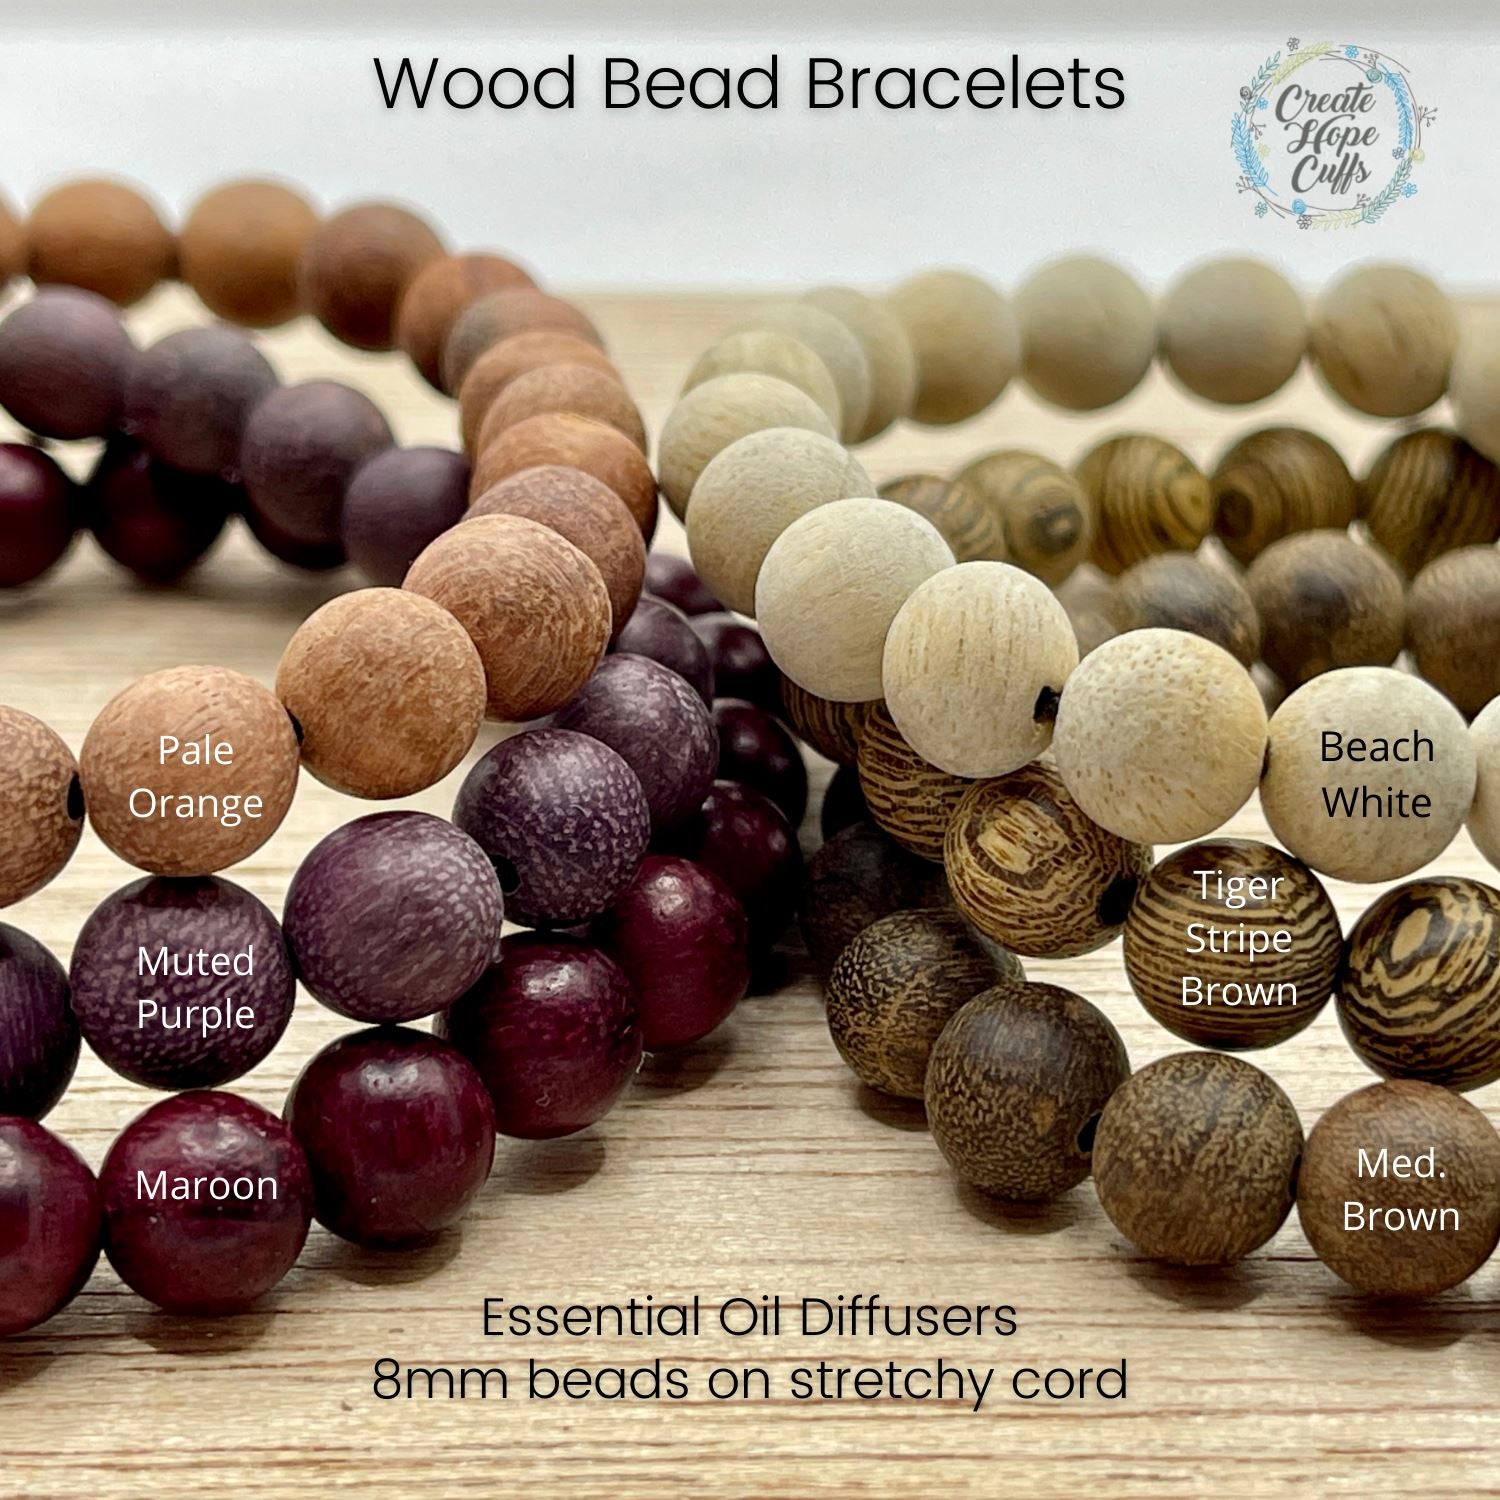 Natural Wood Bead Bracelets | 8mm Beads | 6 Colors | Womens Wood - Beach White